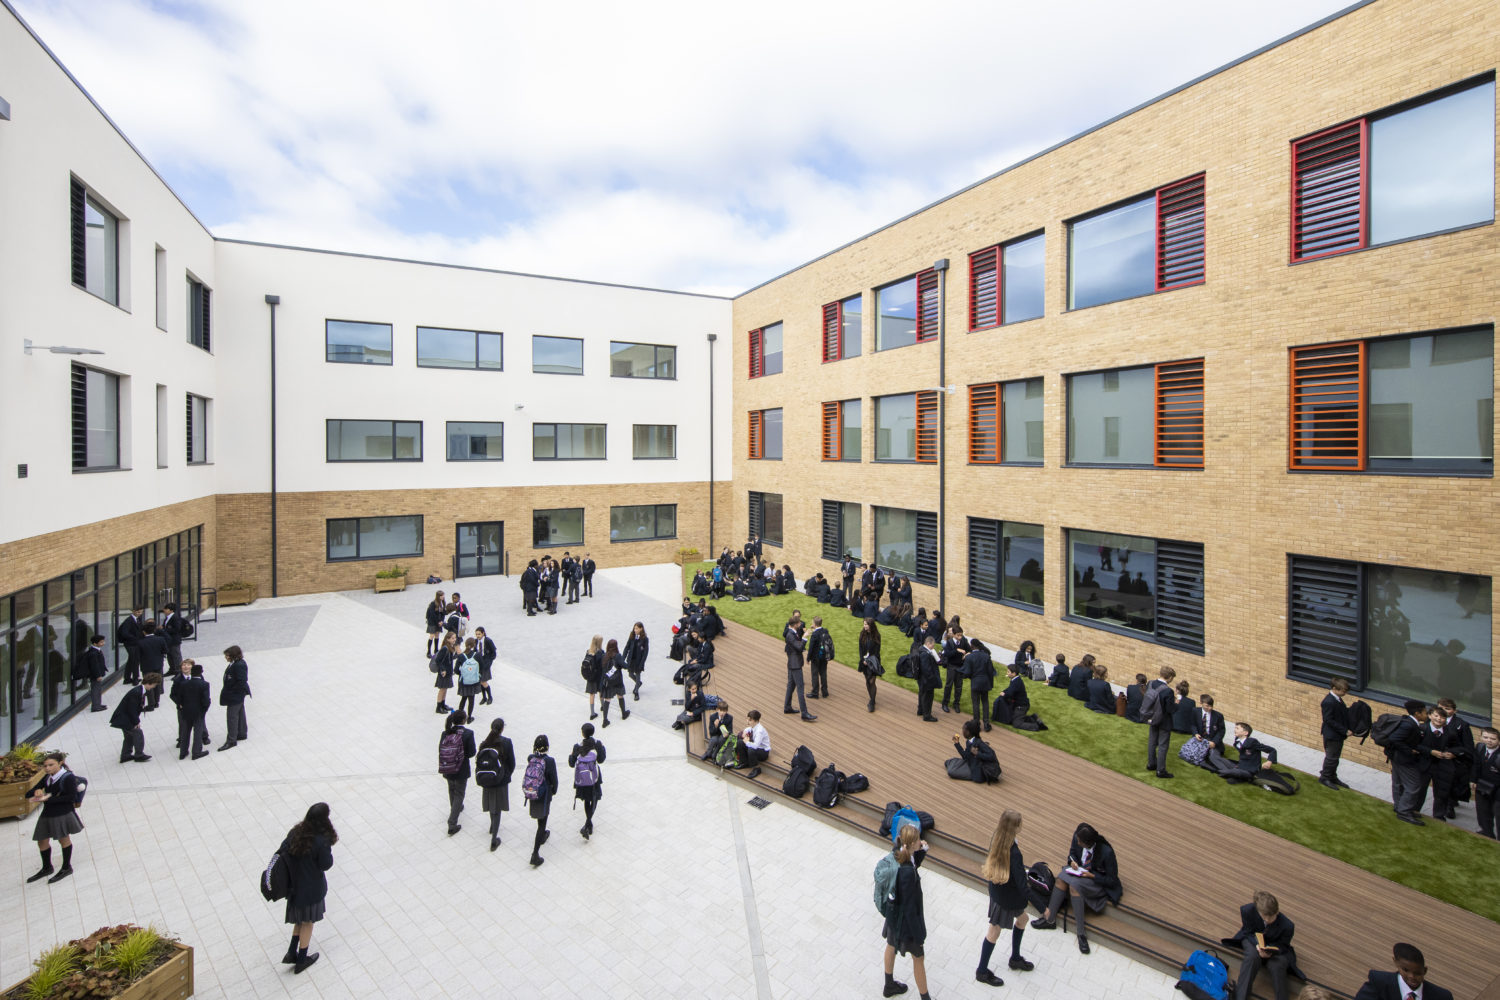 Photo showing the outside of the Leigh Academy Blackheath building, including a large group of students enjoying their break time.